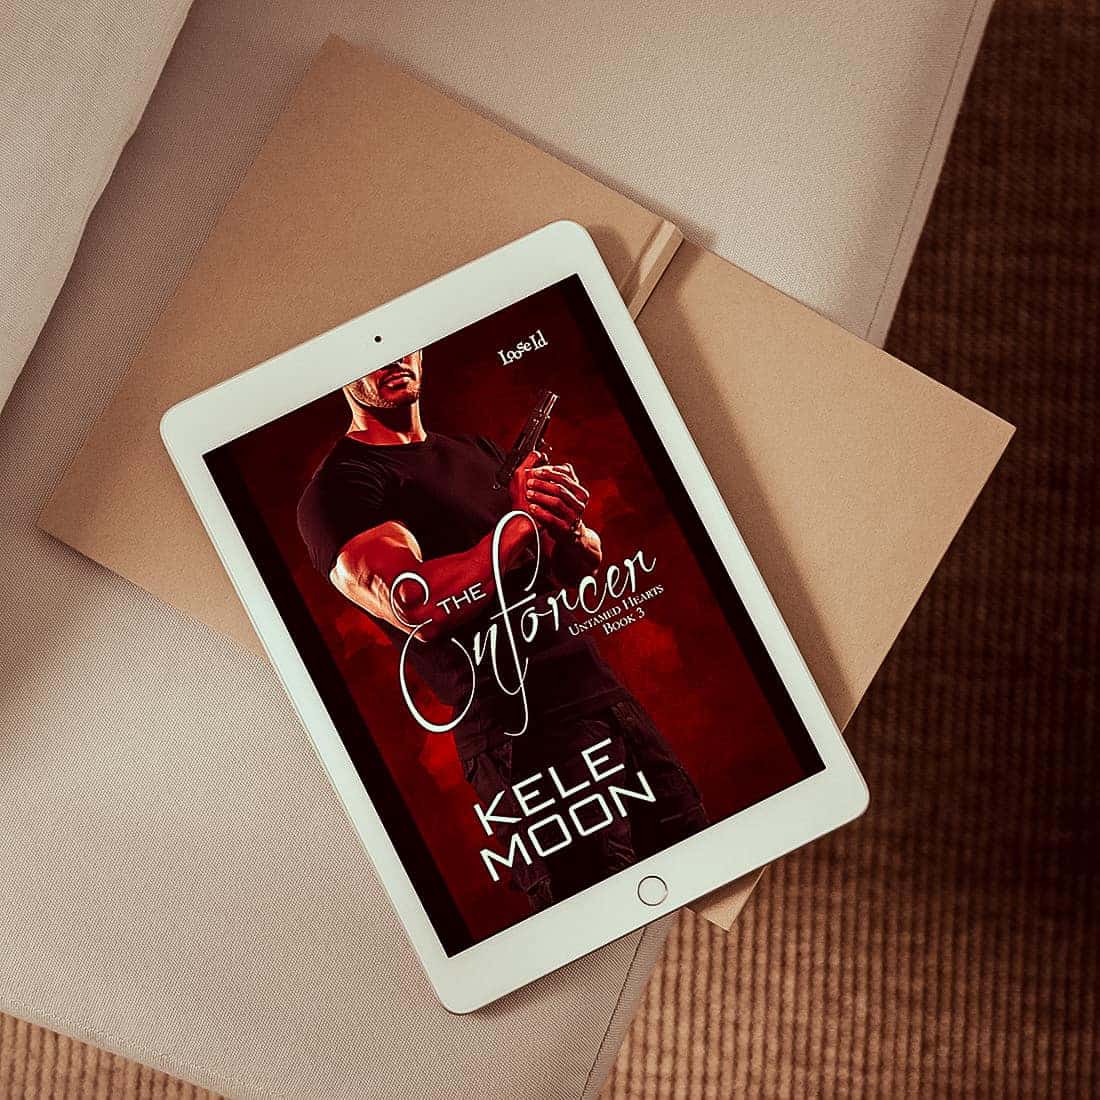 The Enforcer by Kele Moon is a mafia romance that starts off with a bang and never slows down. It's an adrenaline rush from start to finish that completely blew me away!